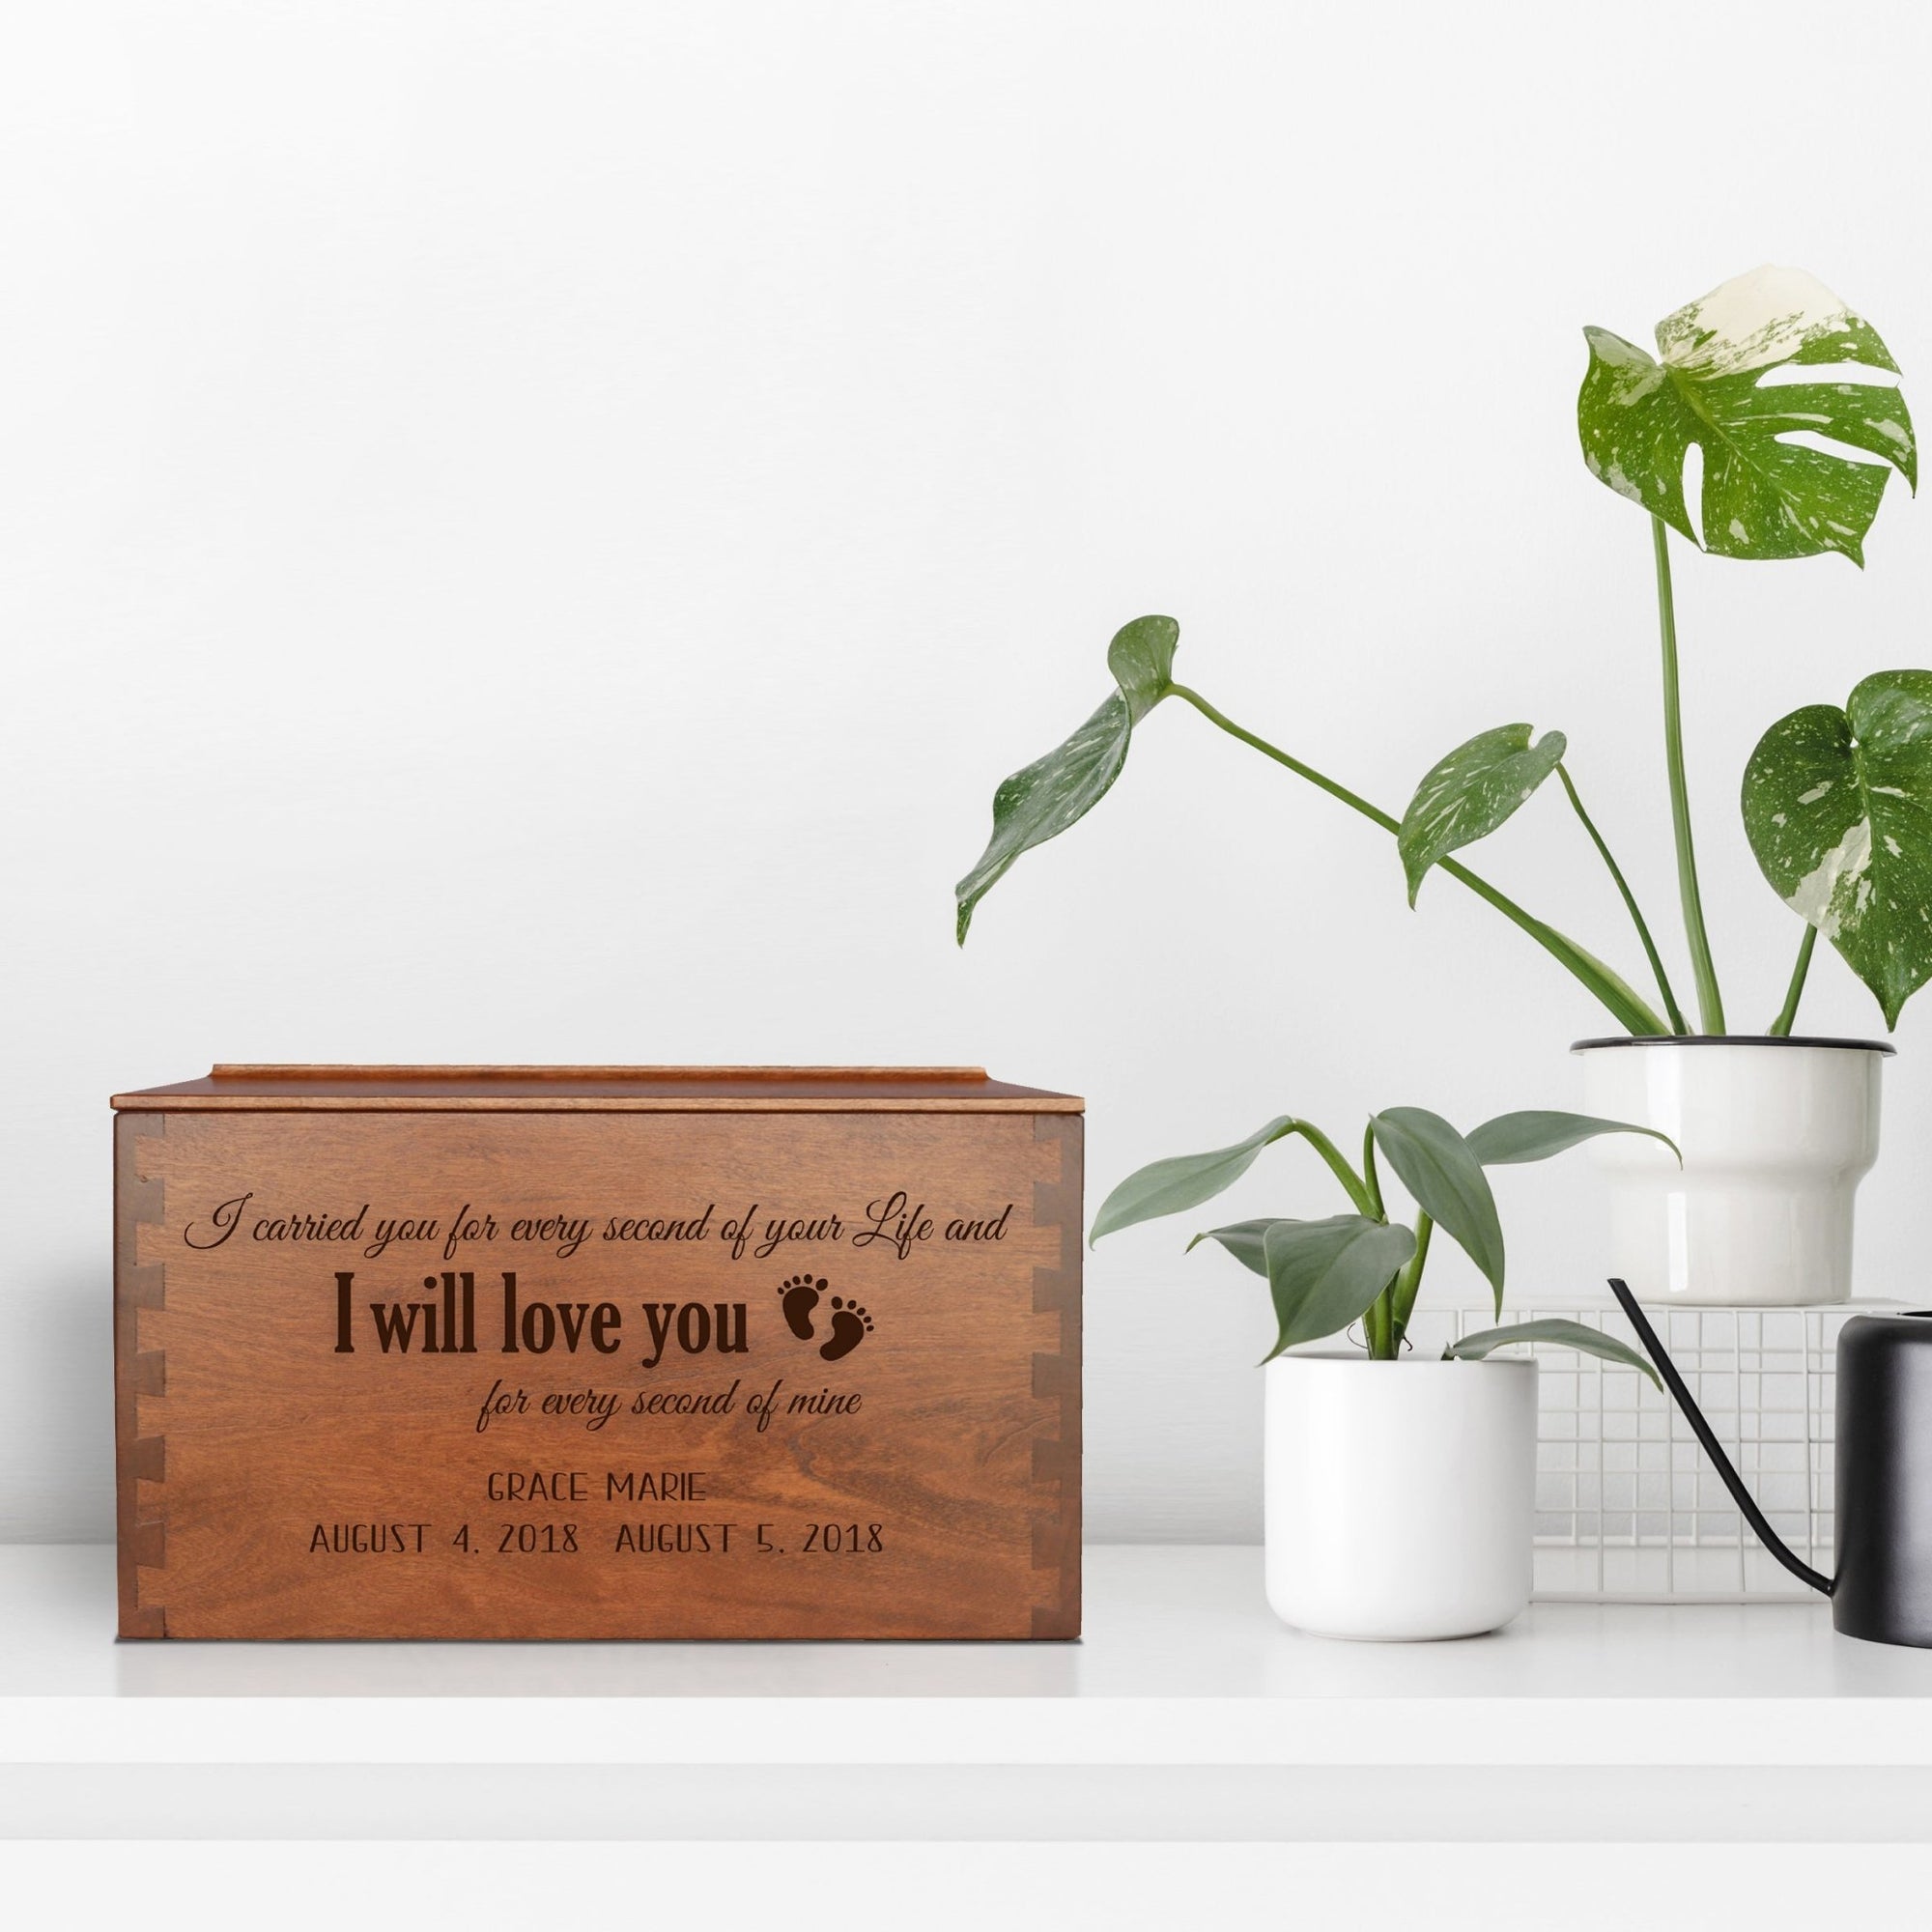 I Carried You Foot Personalized Memorial Decorative Dovetail Cremation Urn For Human Ashes Funeral and Condolence Keepsake - LifeSong Milestones